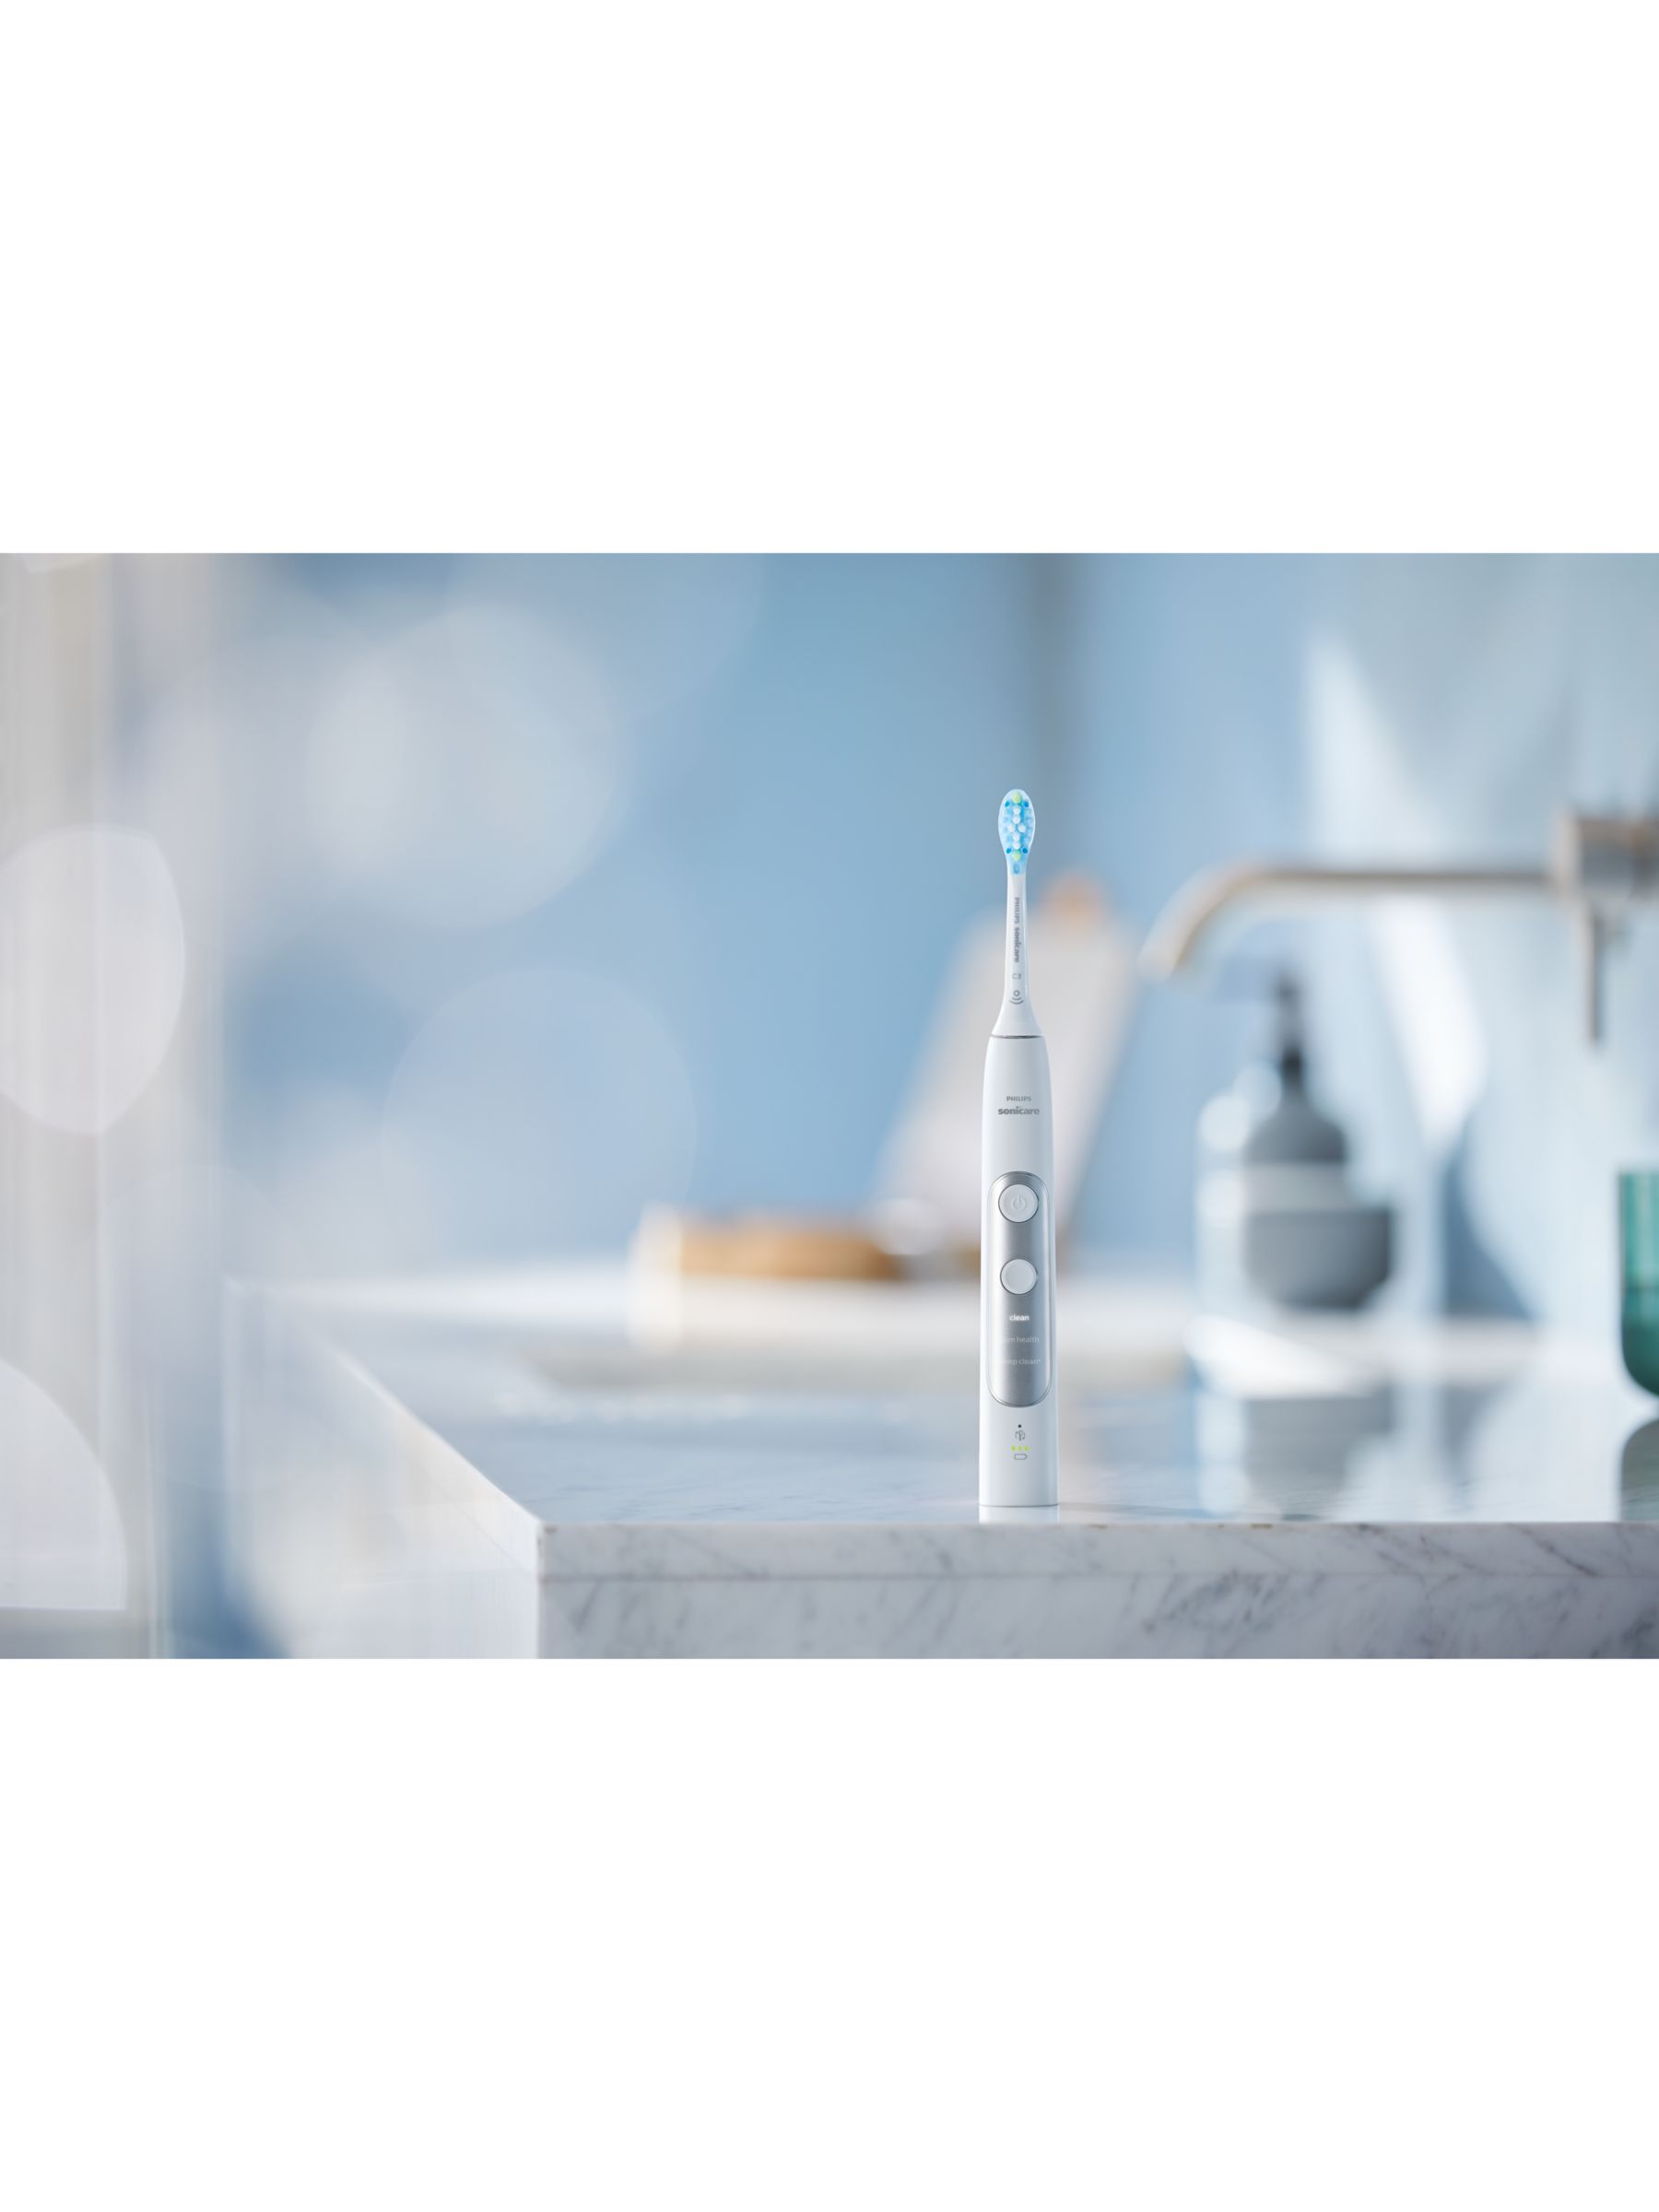 Philips Sonicare HX9611 ExpertClean 7300 Electric Toothbrush, White